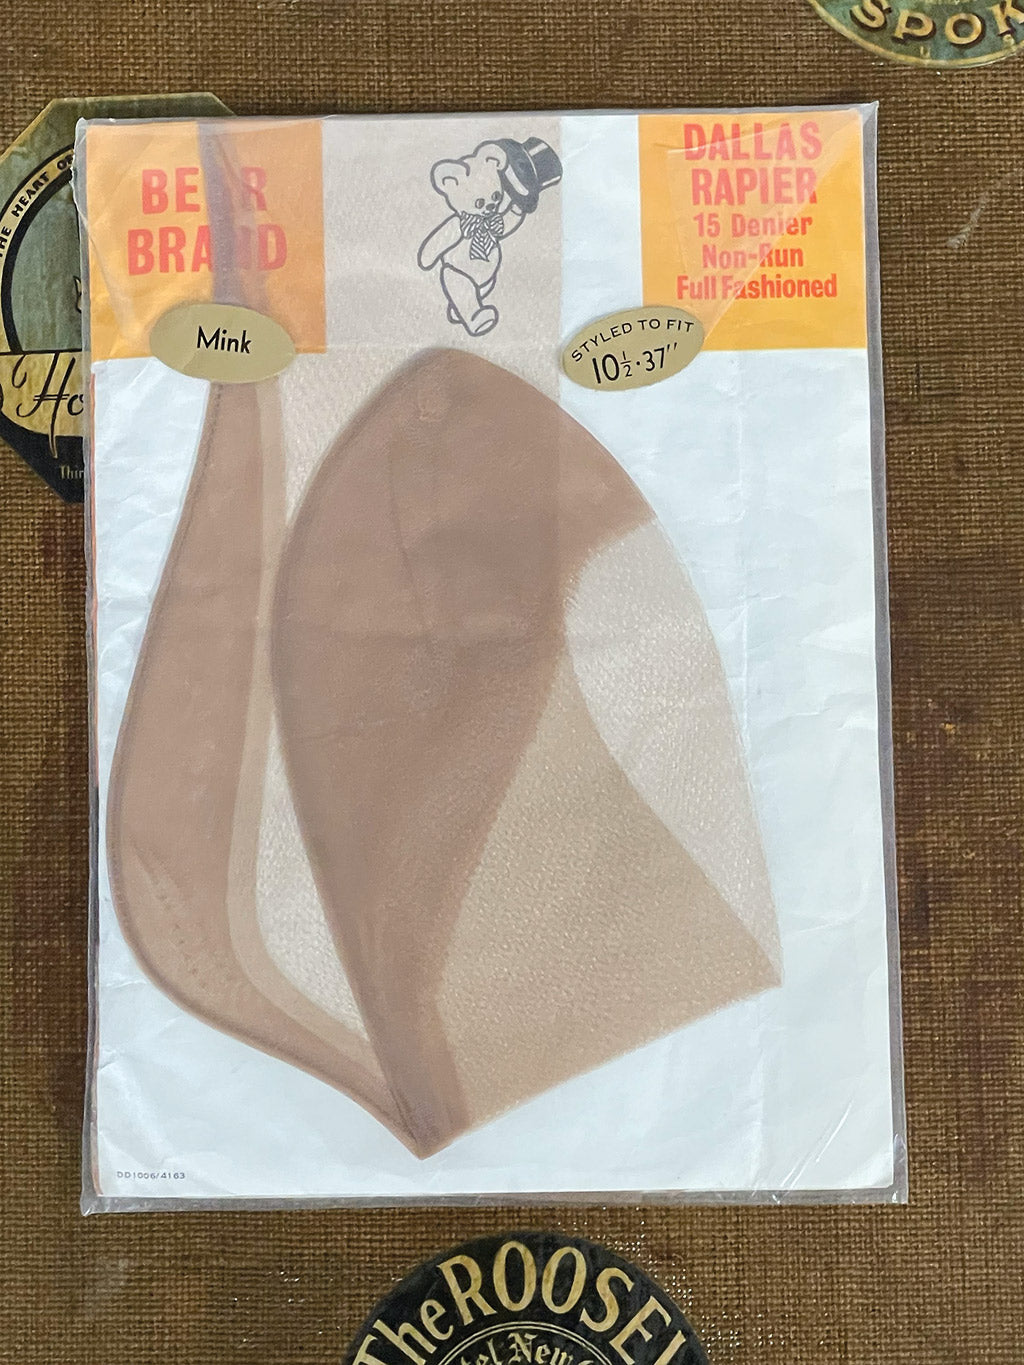 Vintage Bear Brand Dallas Fully Fashioned Stockings front